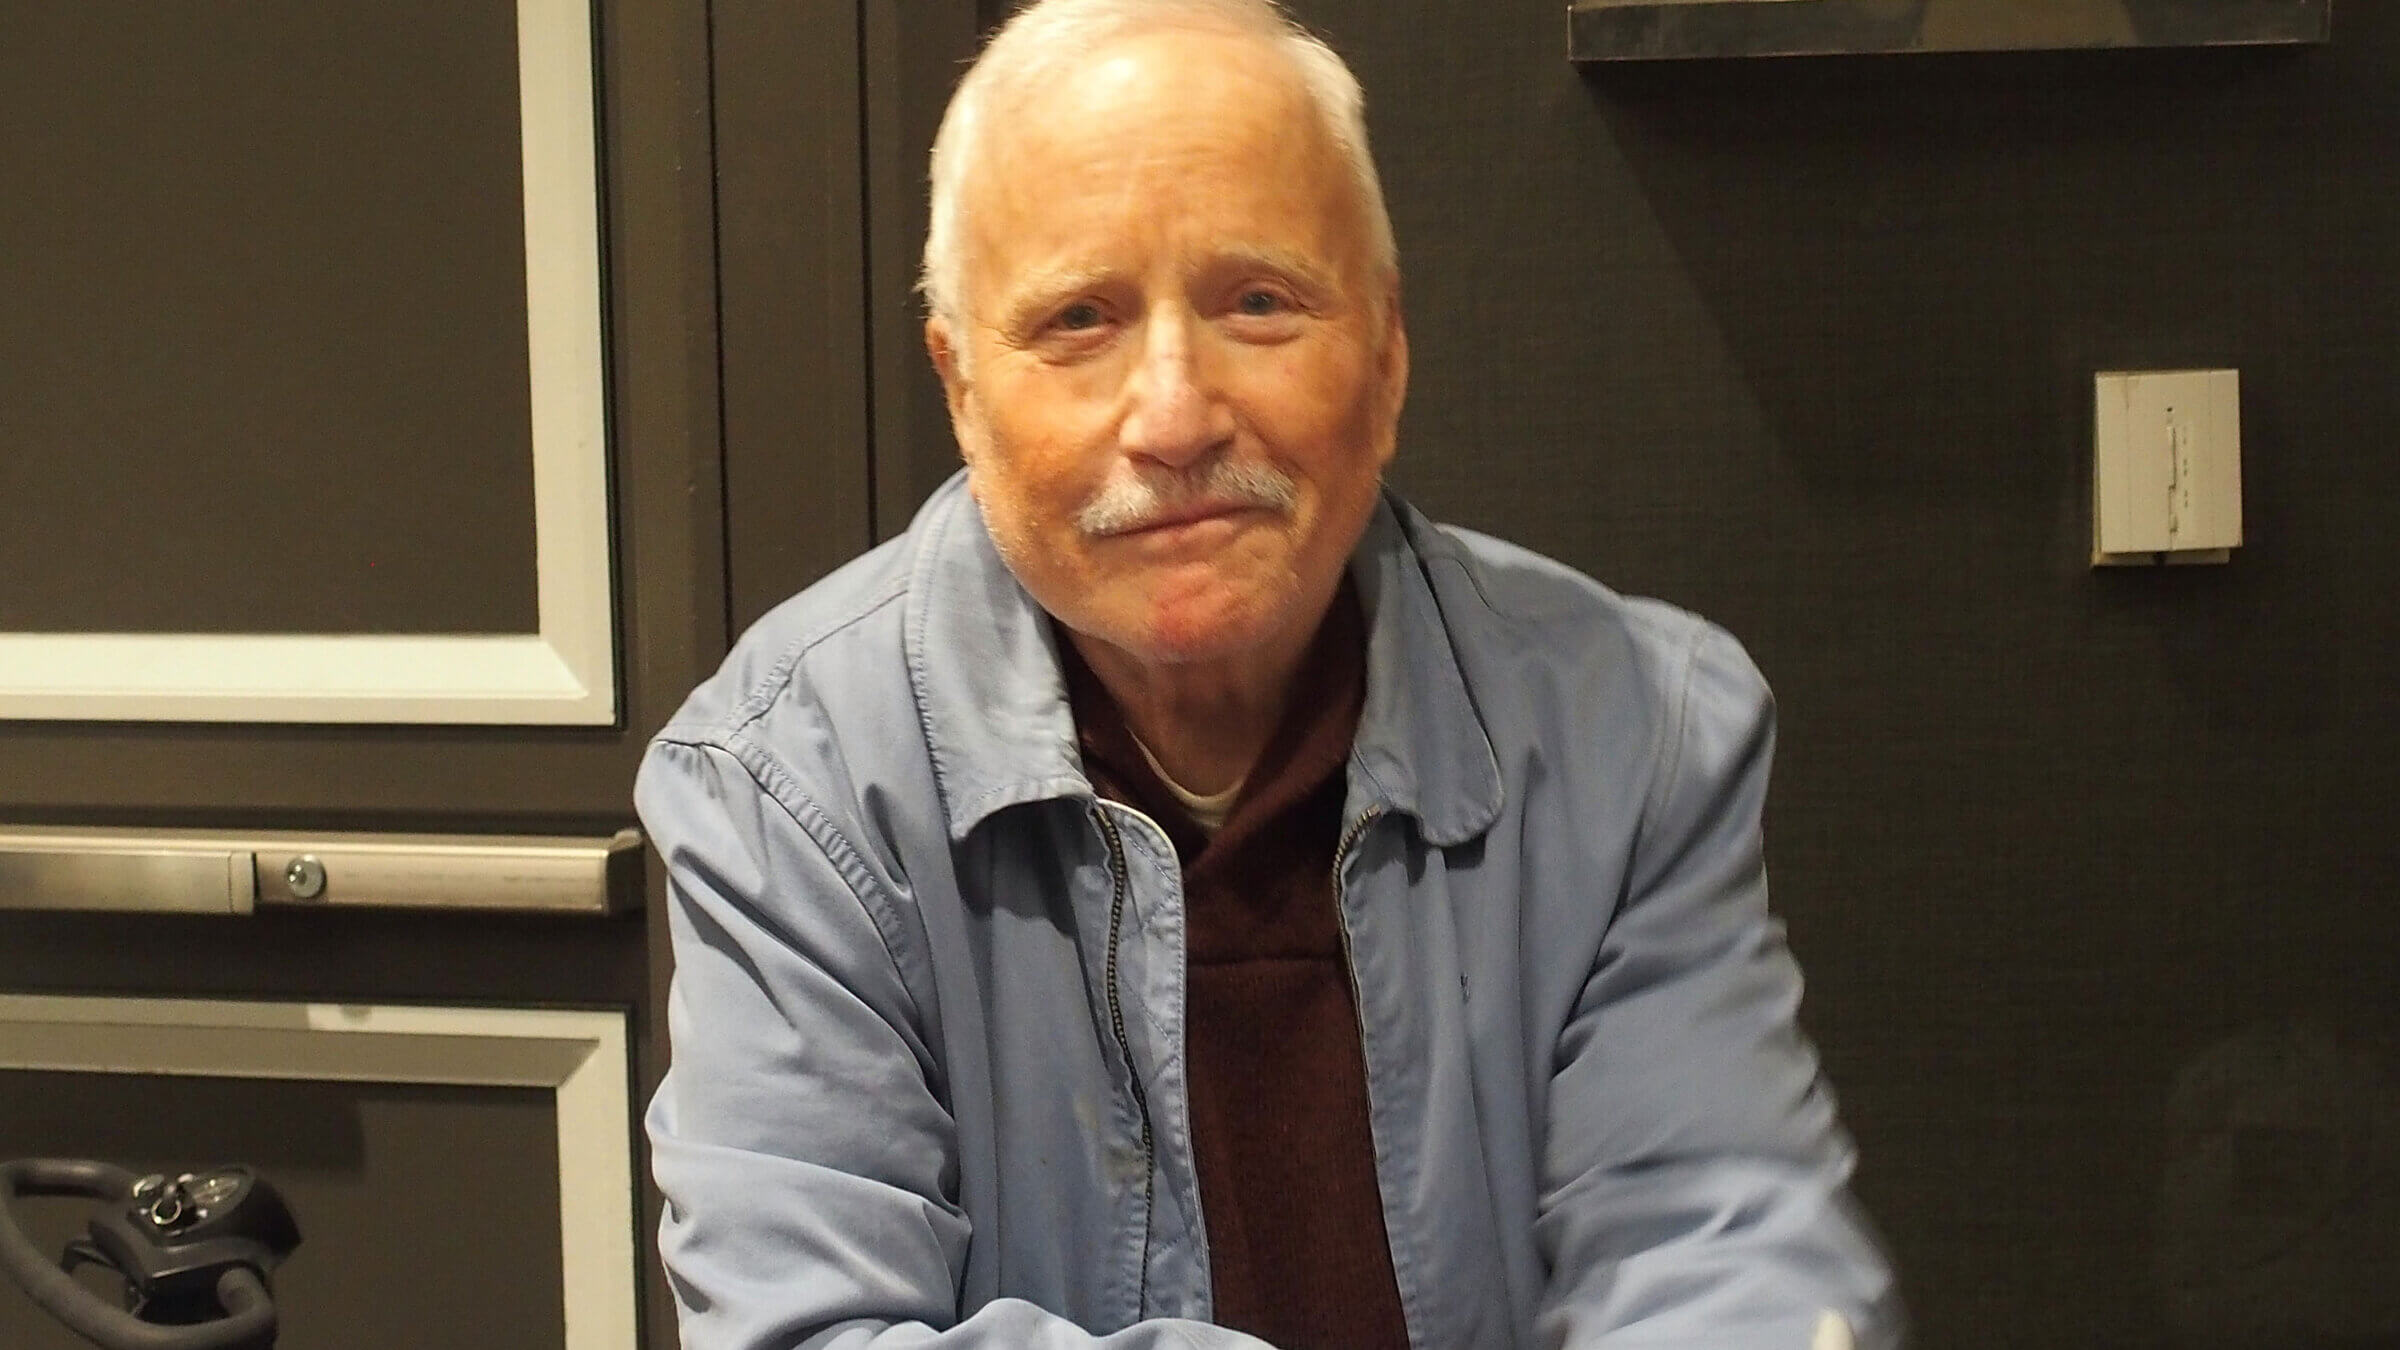 Richard Dreyfuss is upset he may not have the chance to play a Black man.